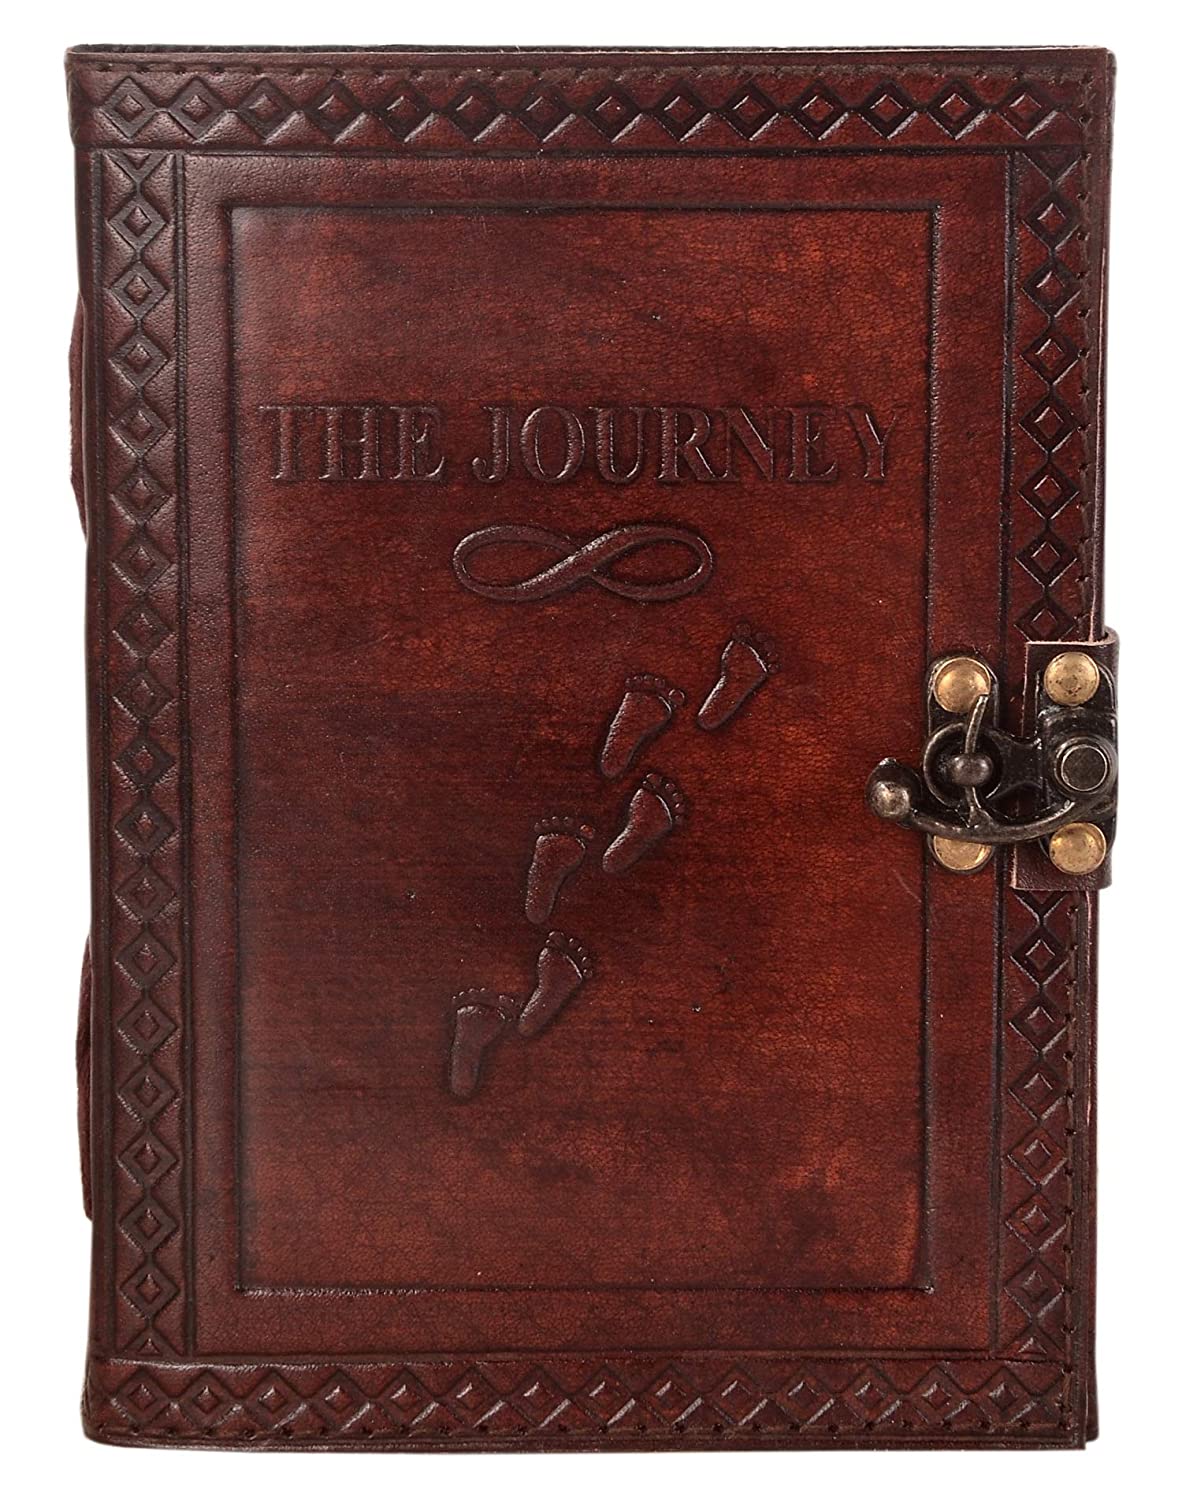 Handmade Leather Diary Embossed with Artist Sketchbook with Antique Lock